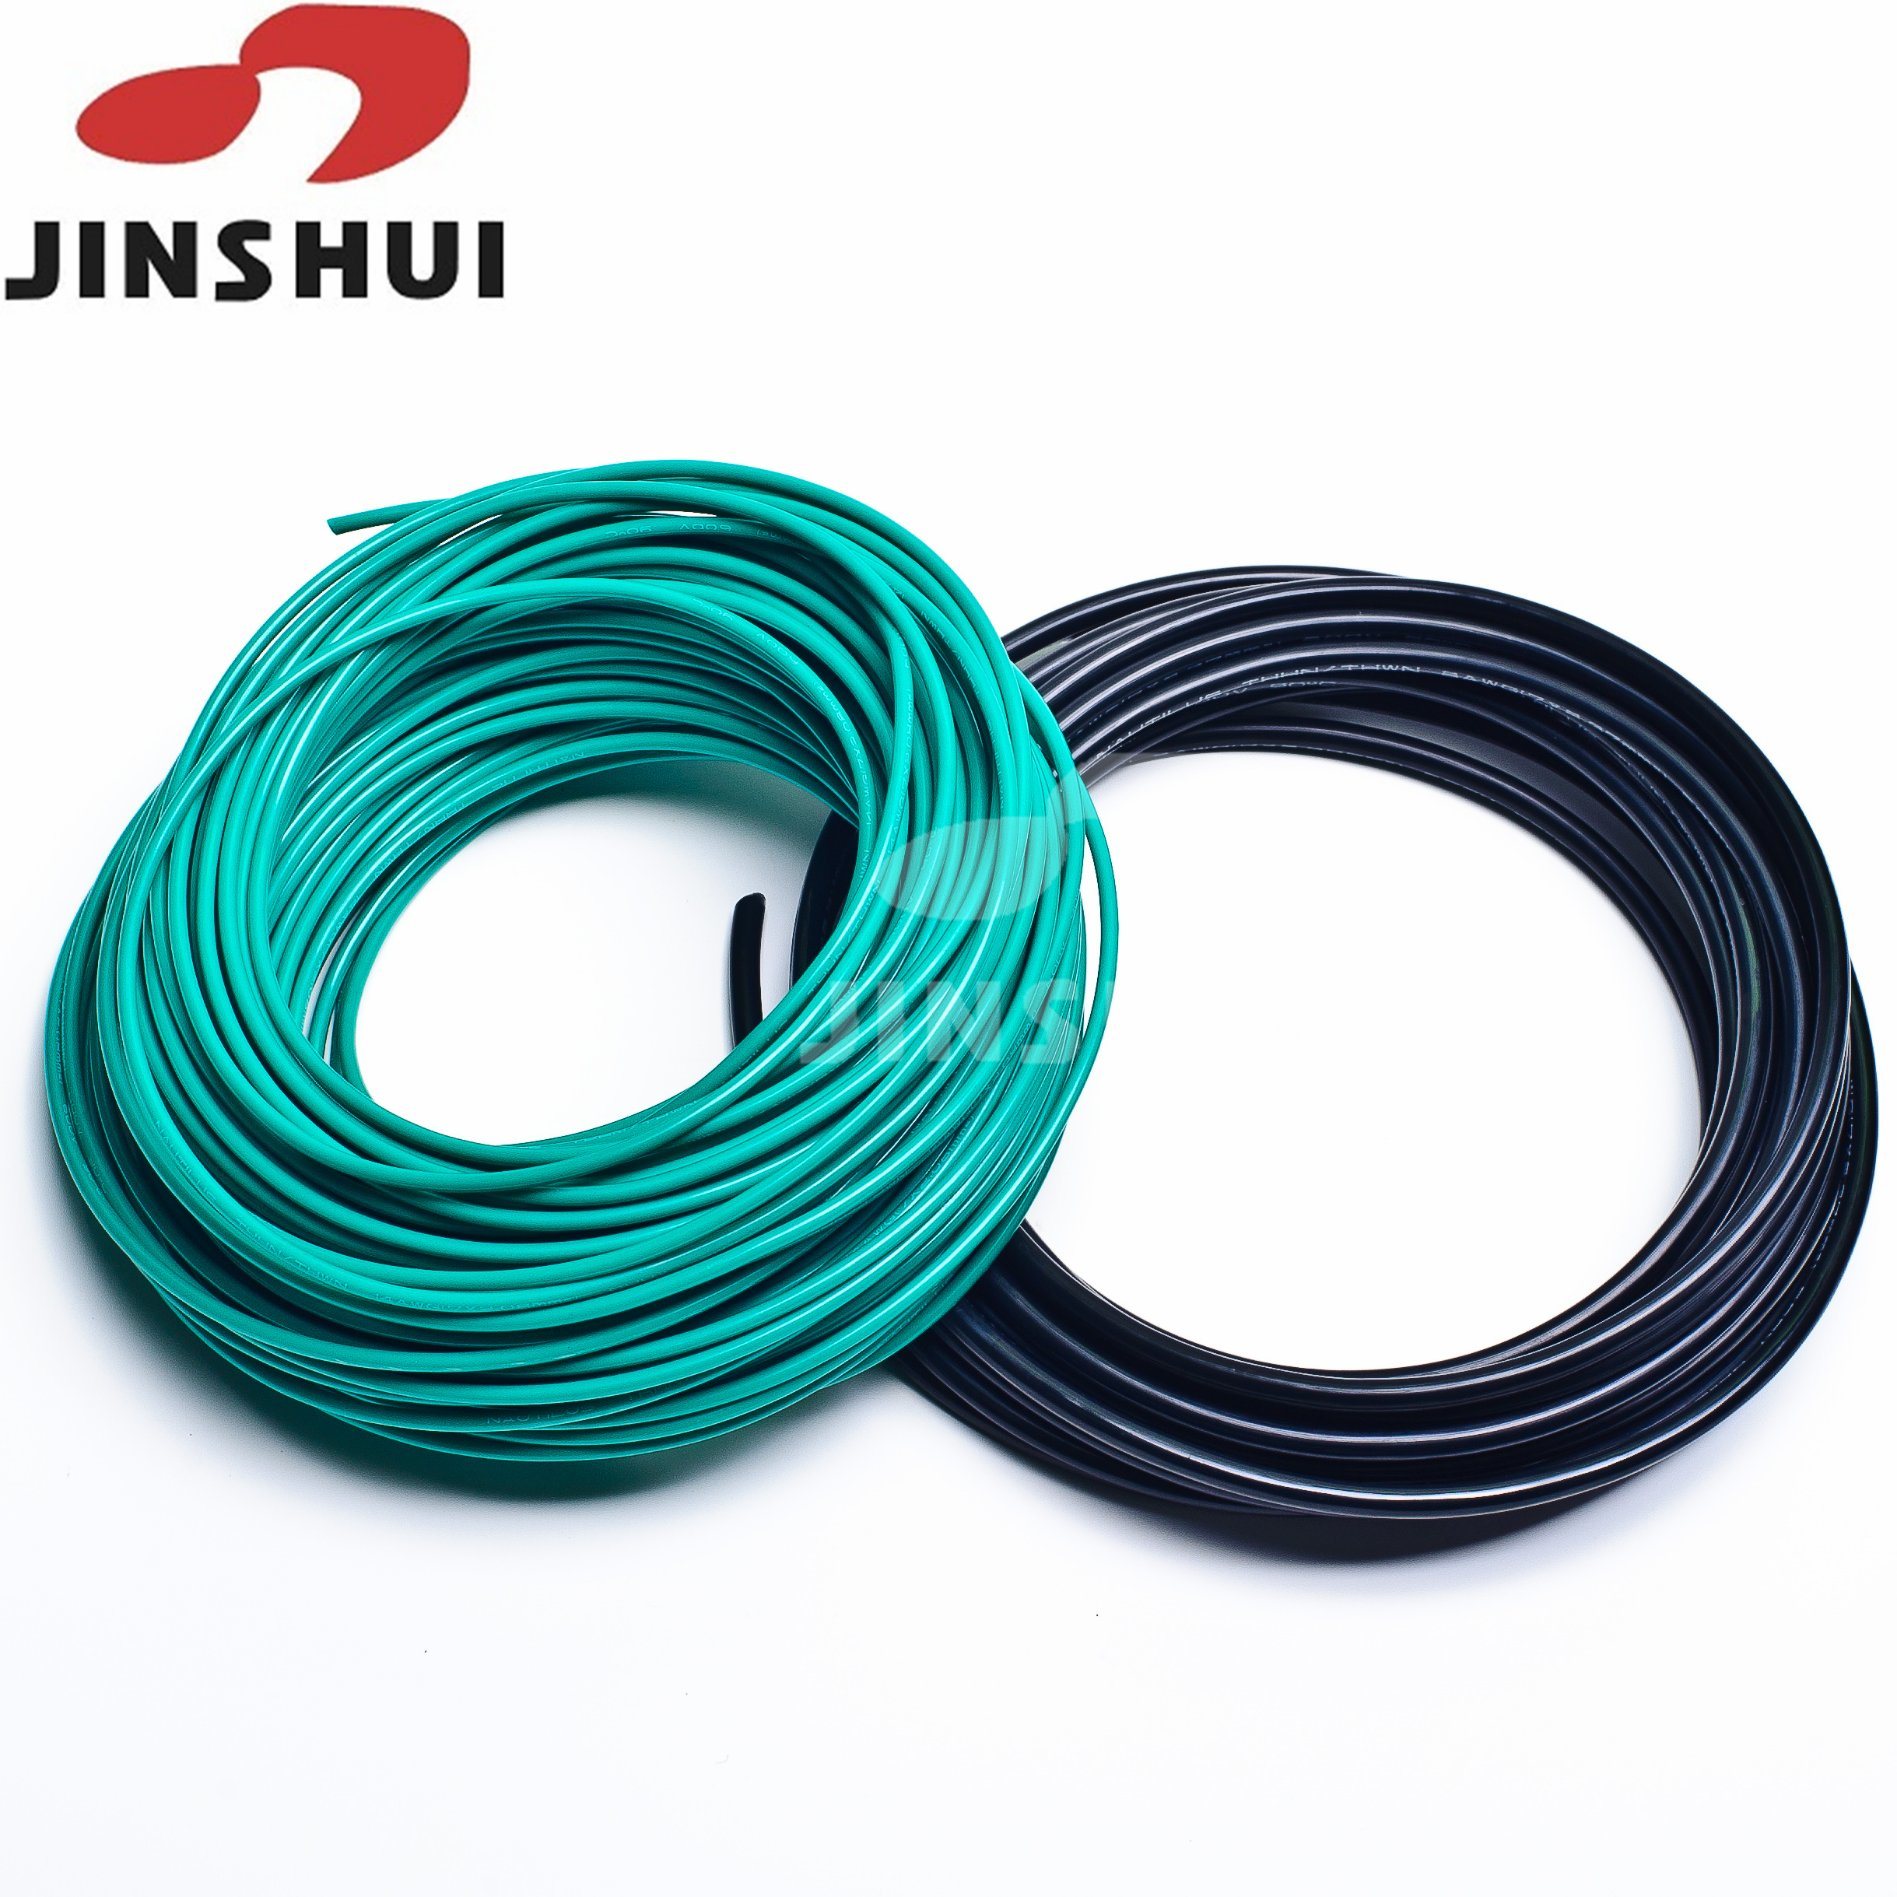 Hot 1.5mm 2.5mm 4mm 6mm 10mm Single Core Copper PVC House Wiring Electrical Building Wire